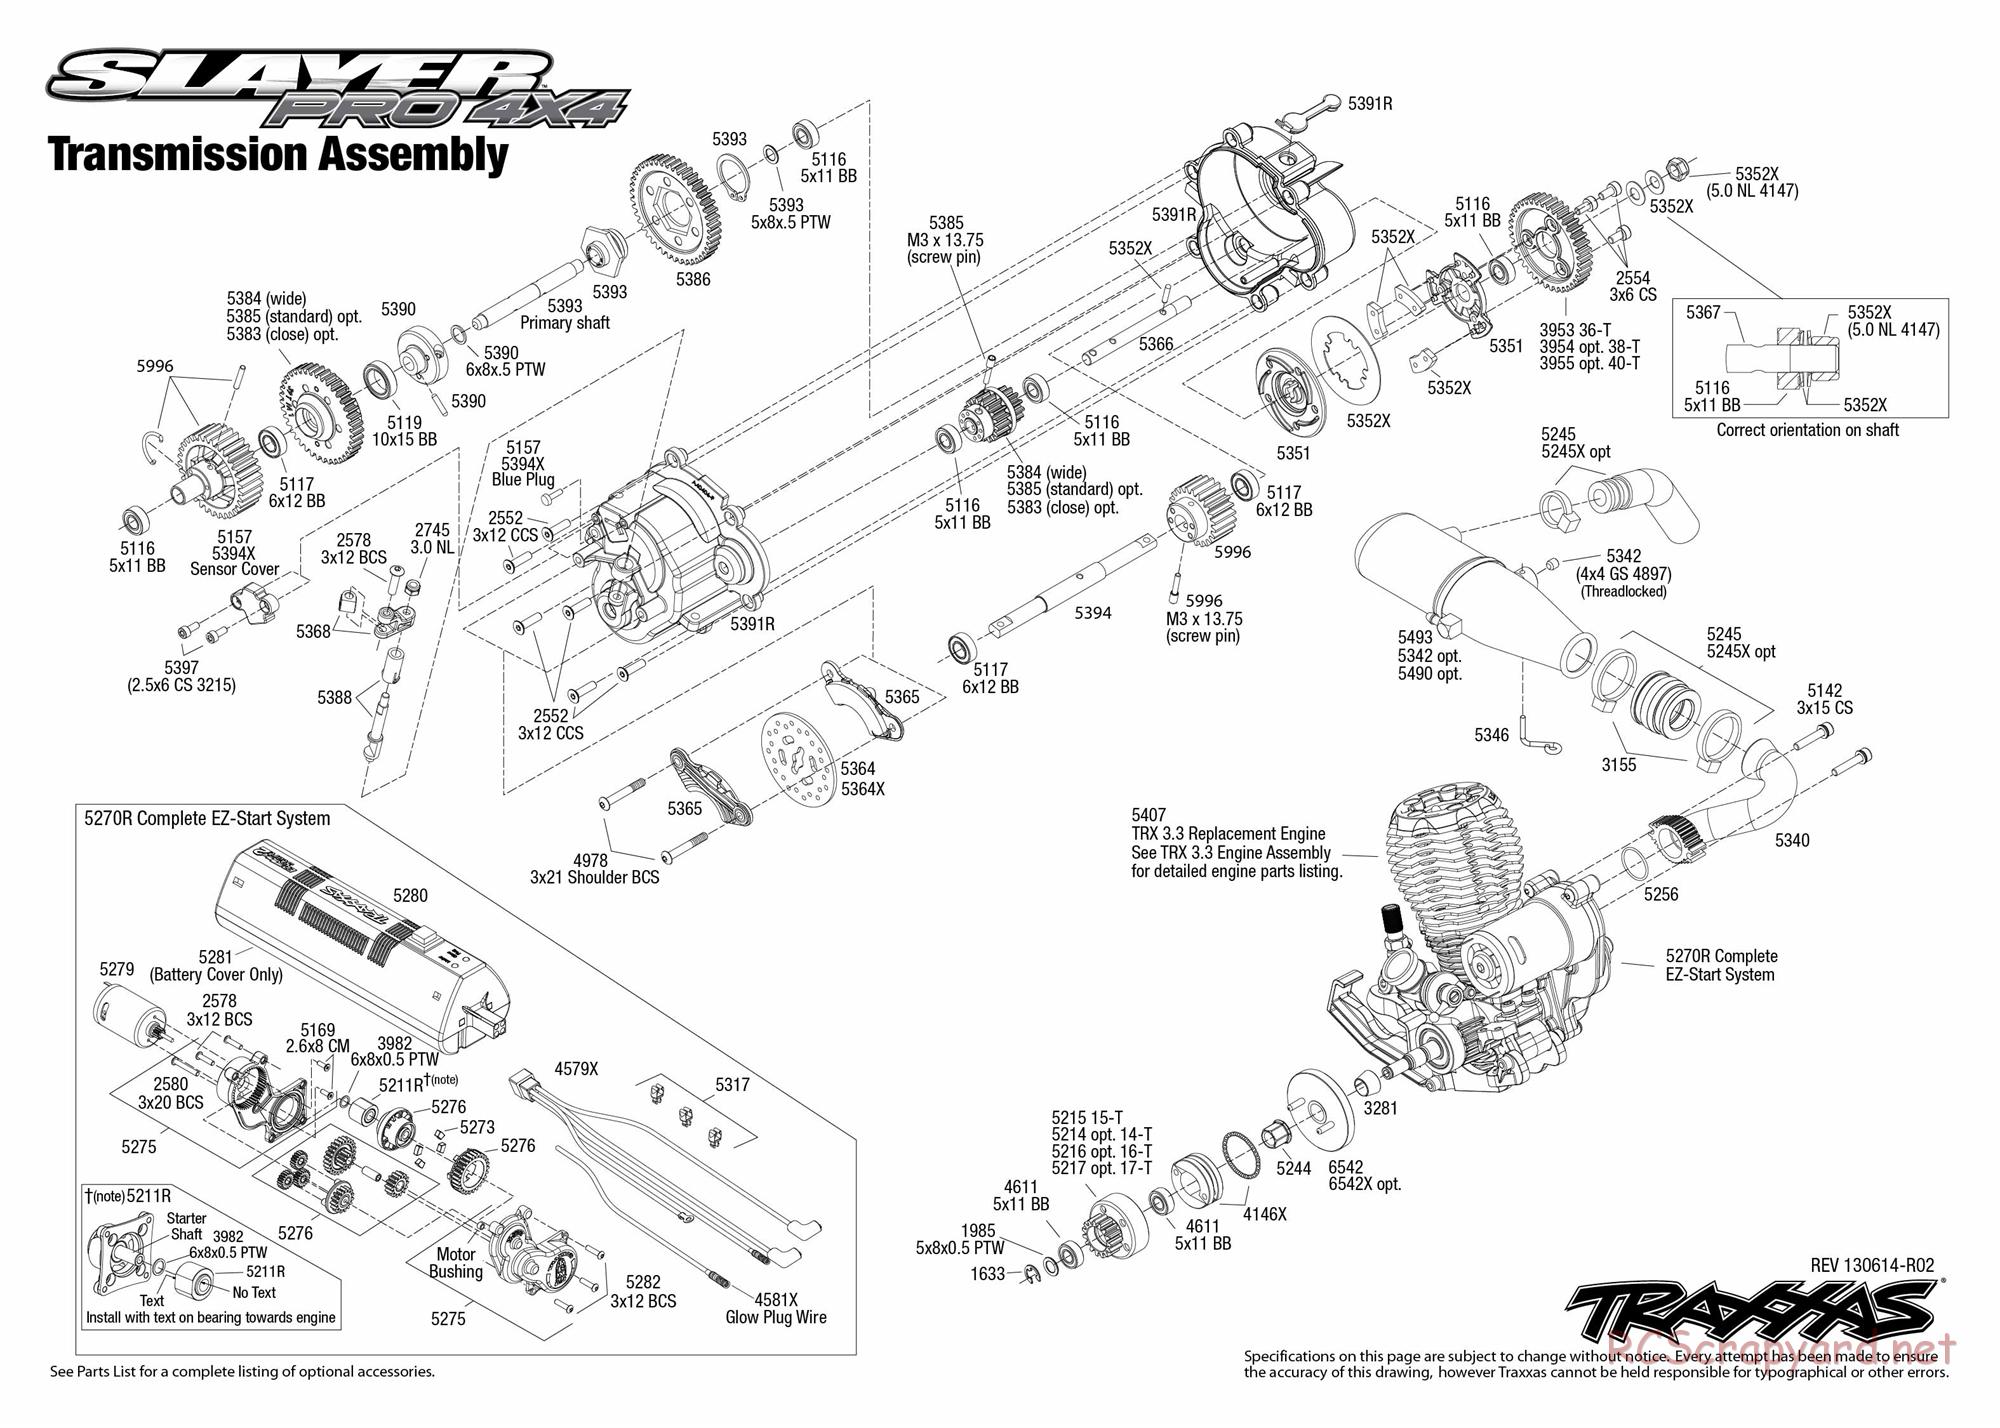 Traxxas - Slayer Pro 4x4 (2012) - Exploded Views - Page 7